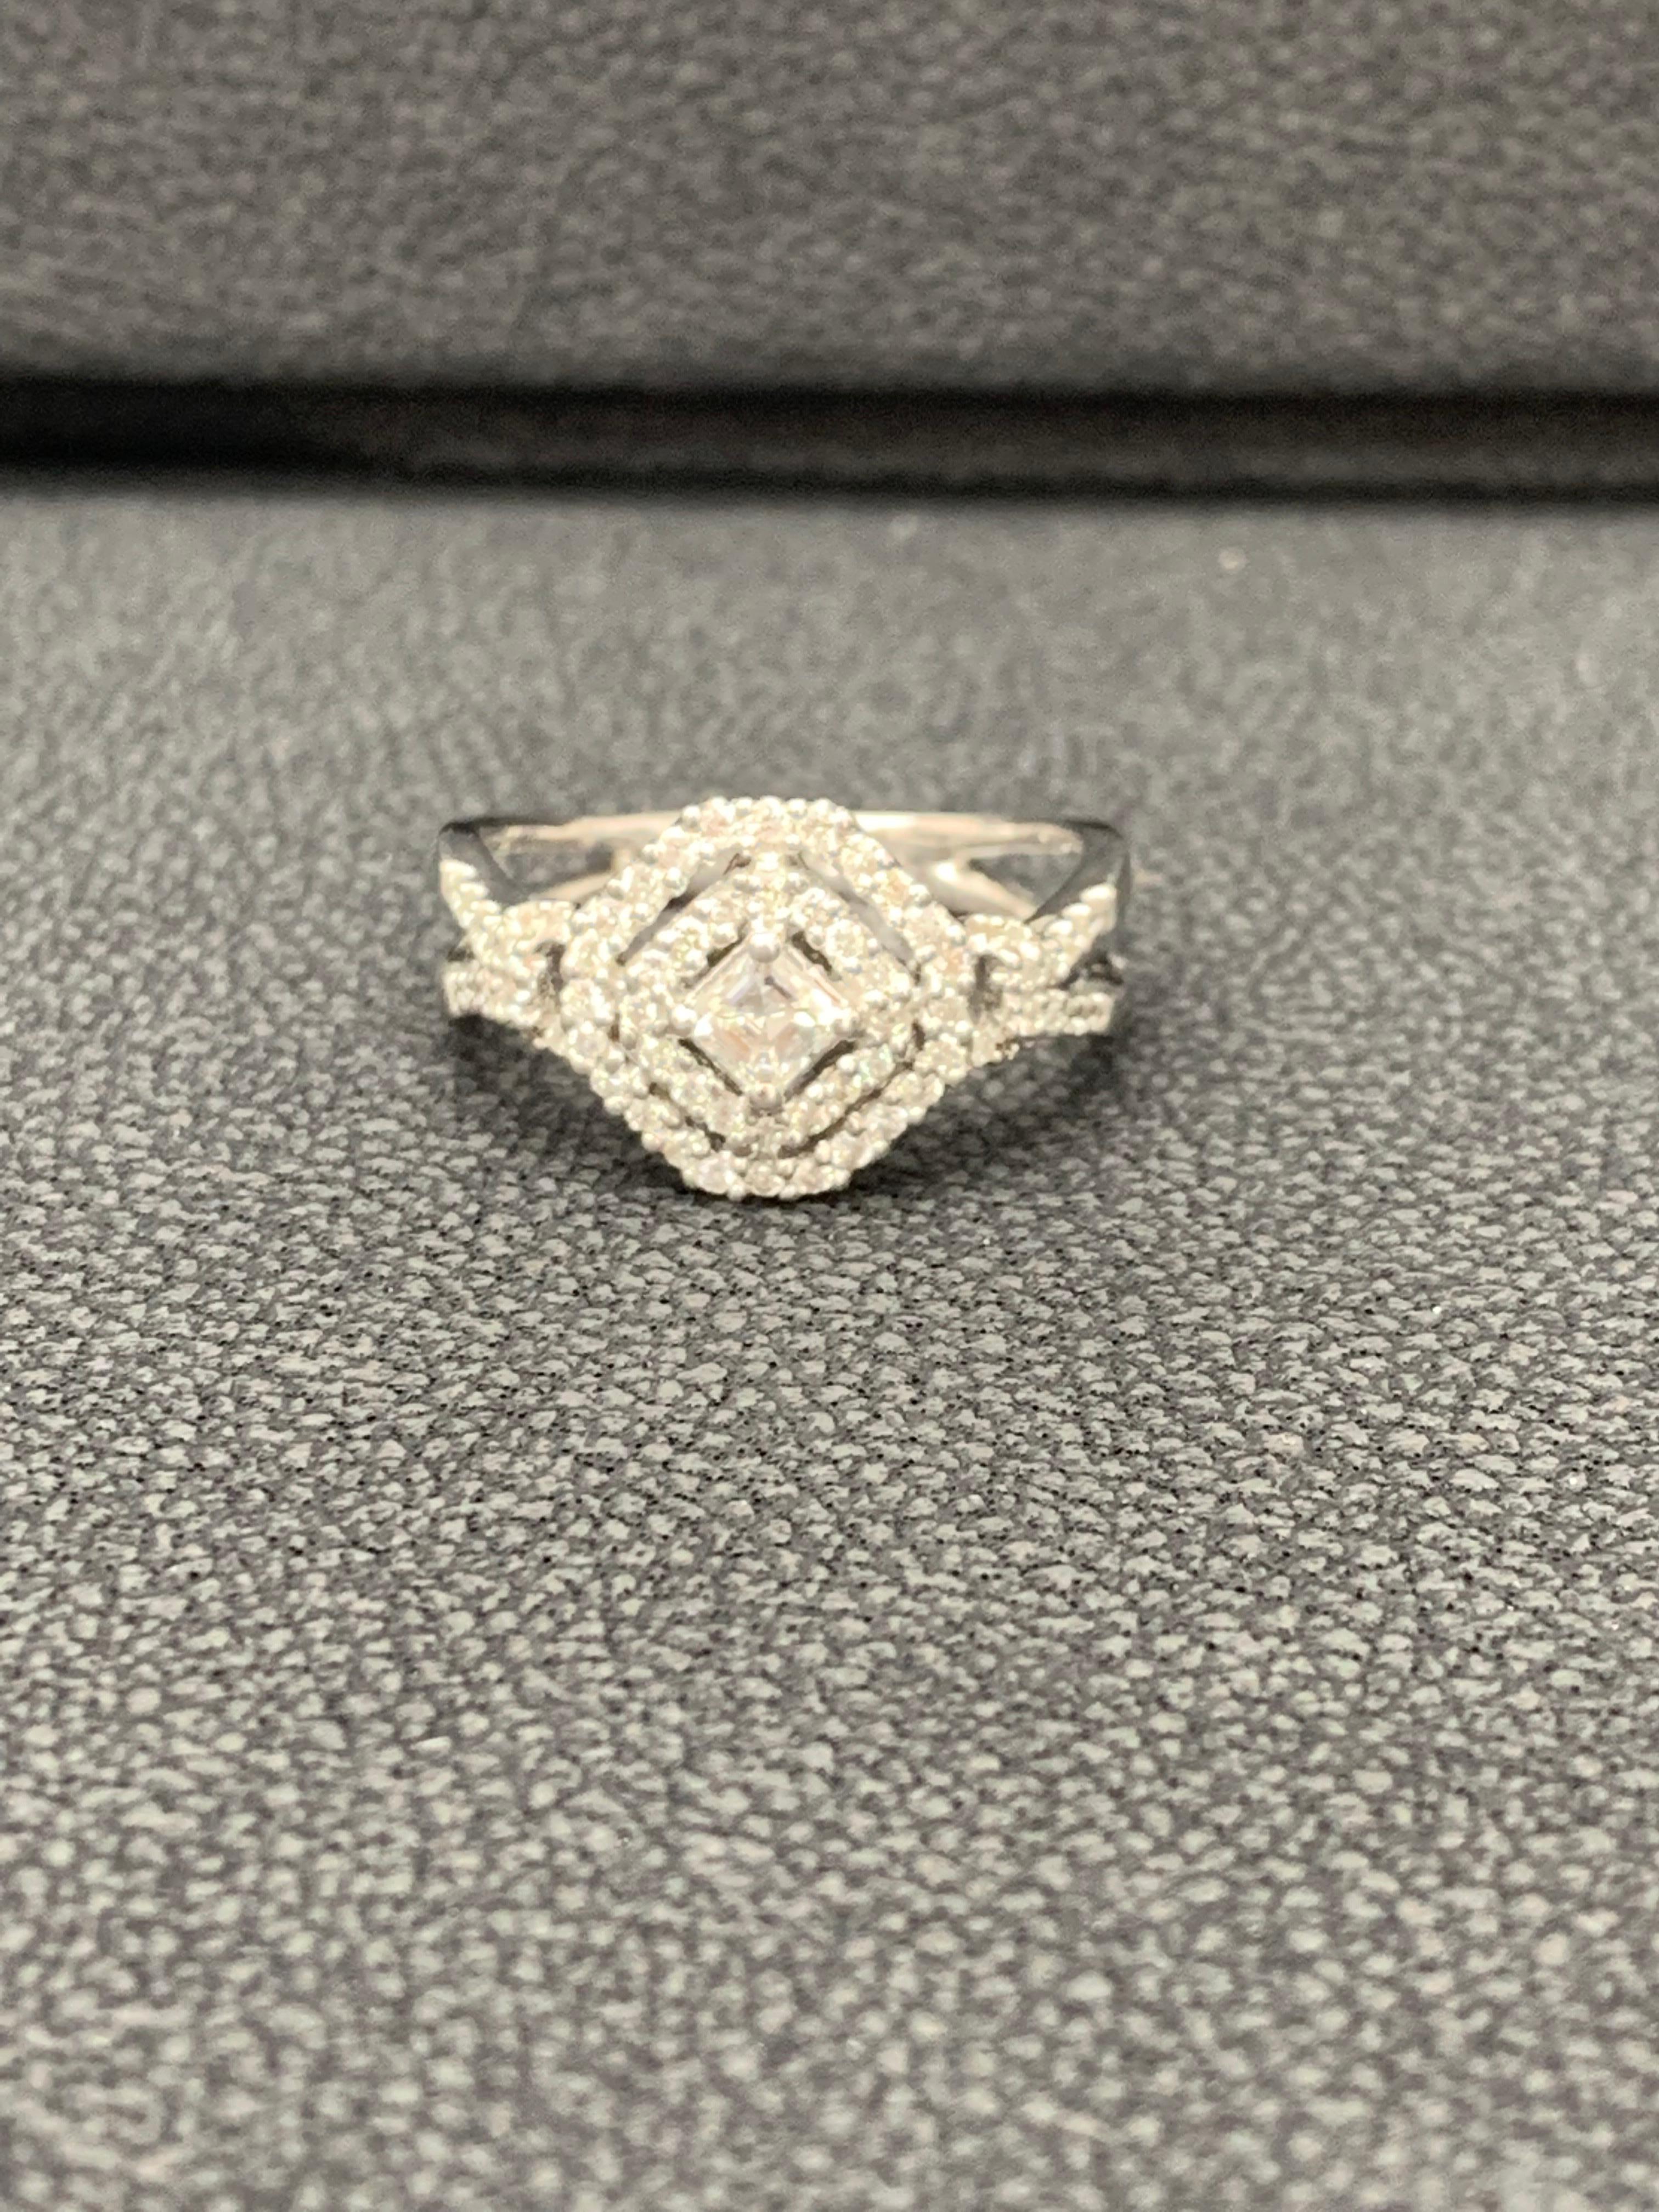 A stylish cocktail ring showcasing open work design made in 18 karat white gold. Princess cut center diamond weigh 0.25 carats. All other brilliant round diamond weigh 0.36 carat in total.

Size 6.5 US (Sizable). One of a Kind  piece.
All diamonds